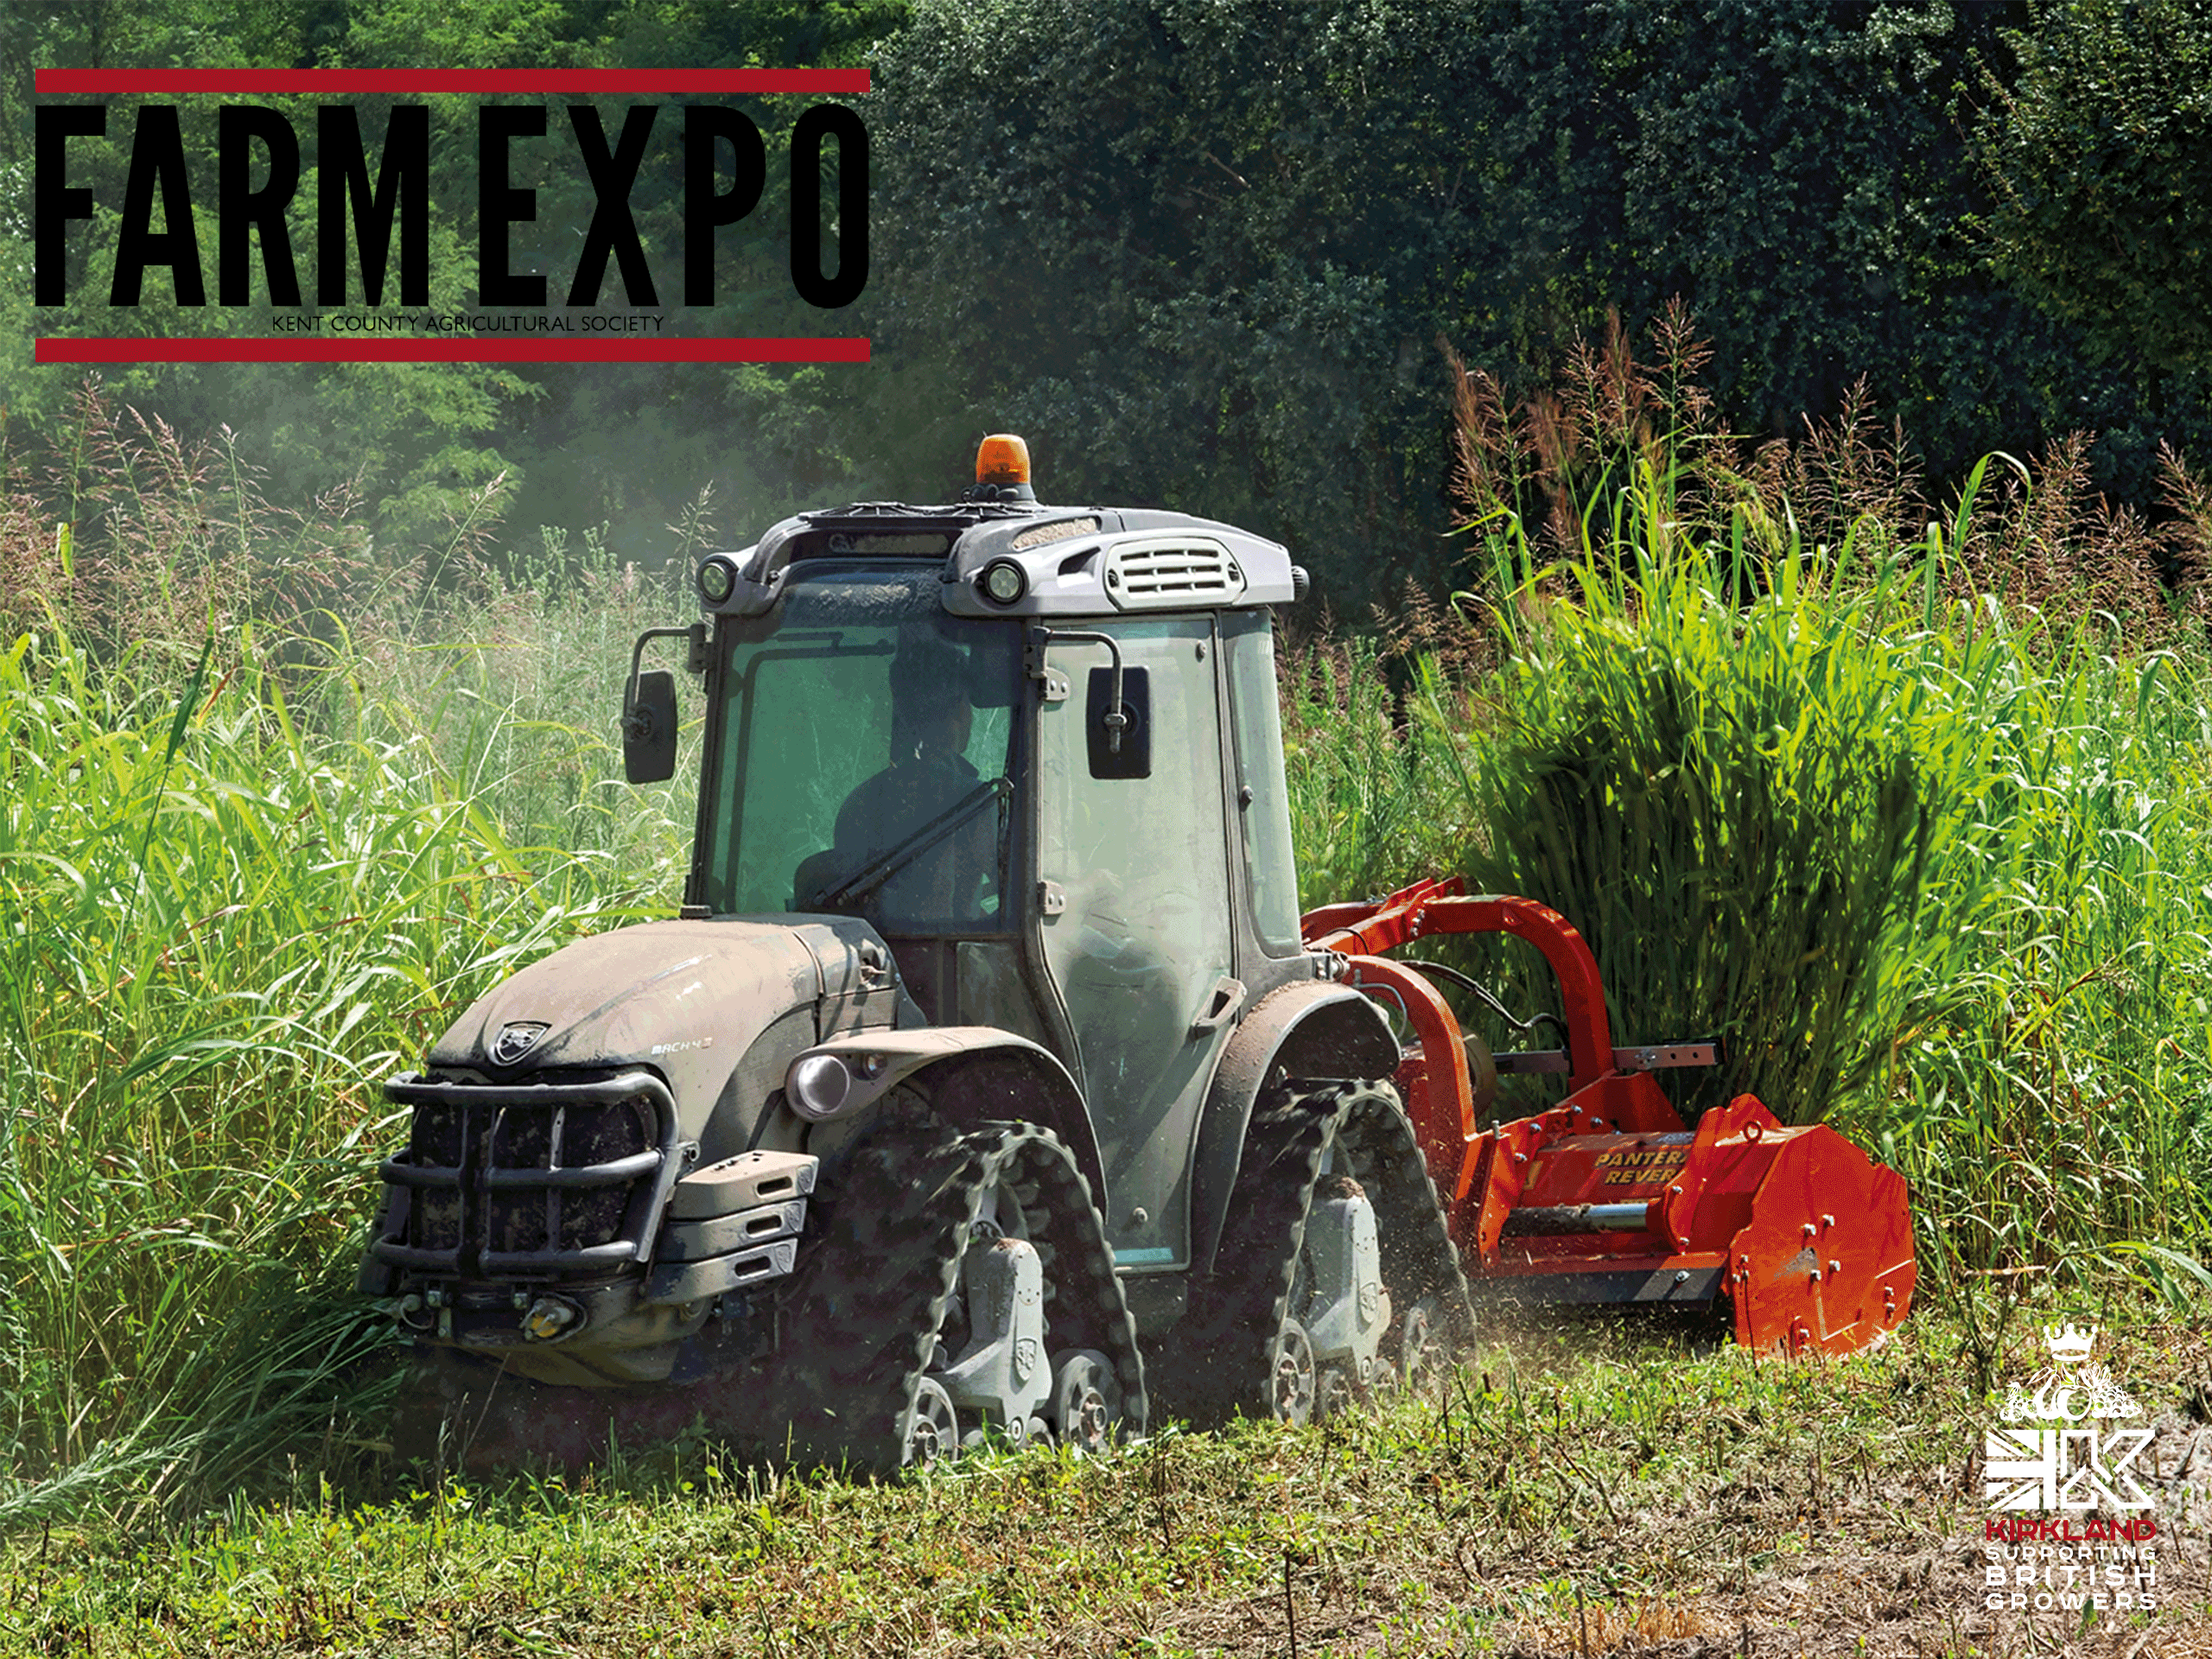 Find us at Farm-Expo!